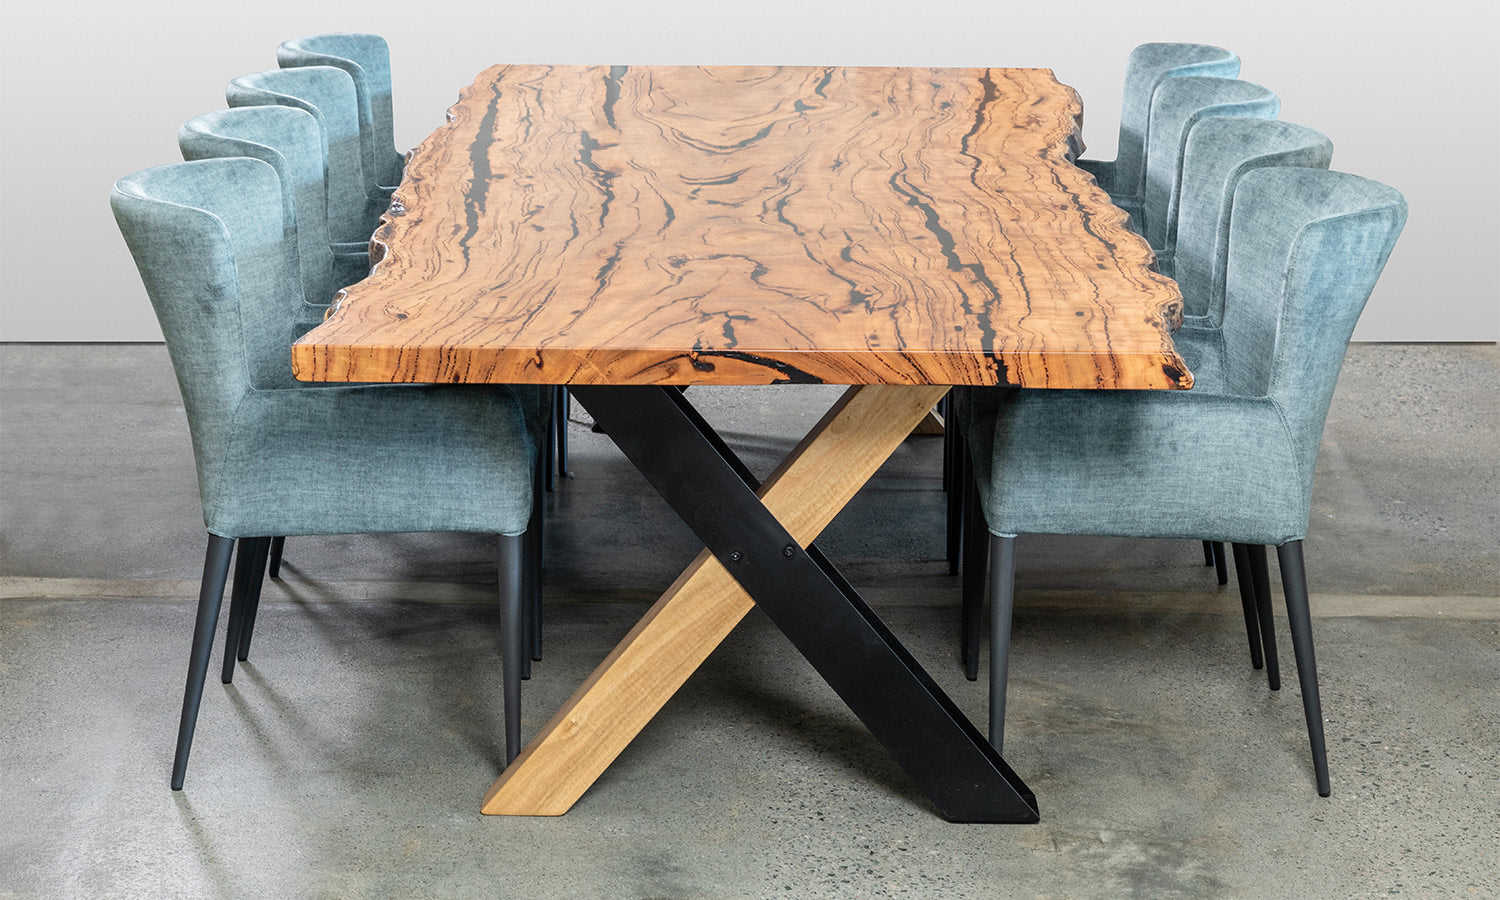 Intwine Solid Marri Timber Slab Dining Table with Natural Edge  Unique X shaped hybrid base wood and metal, made in Perth, WA